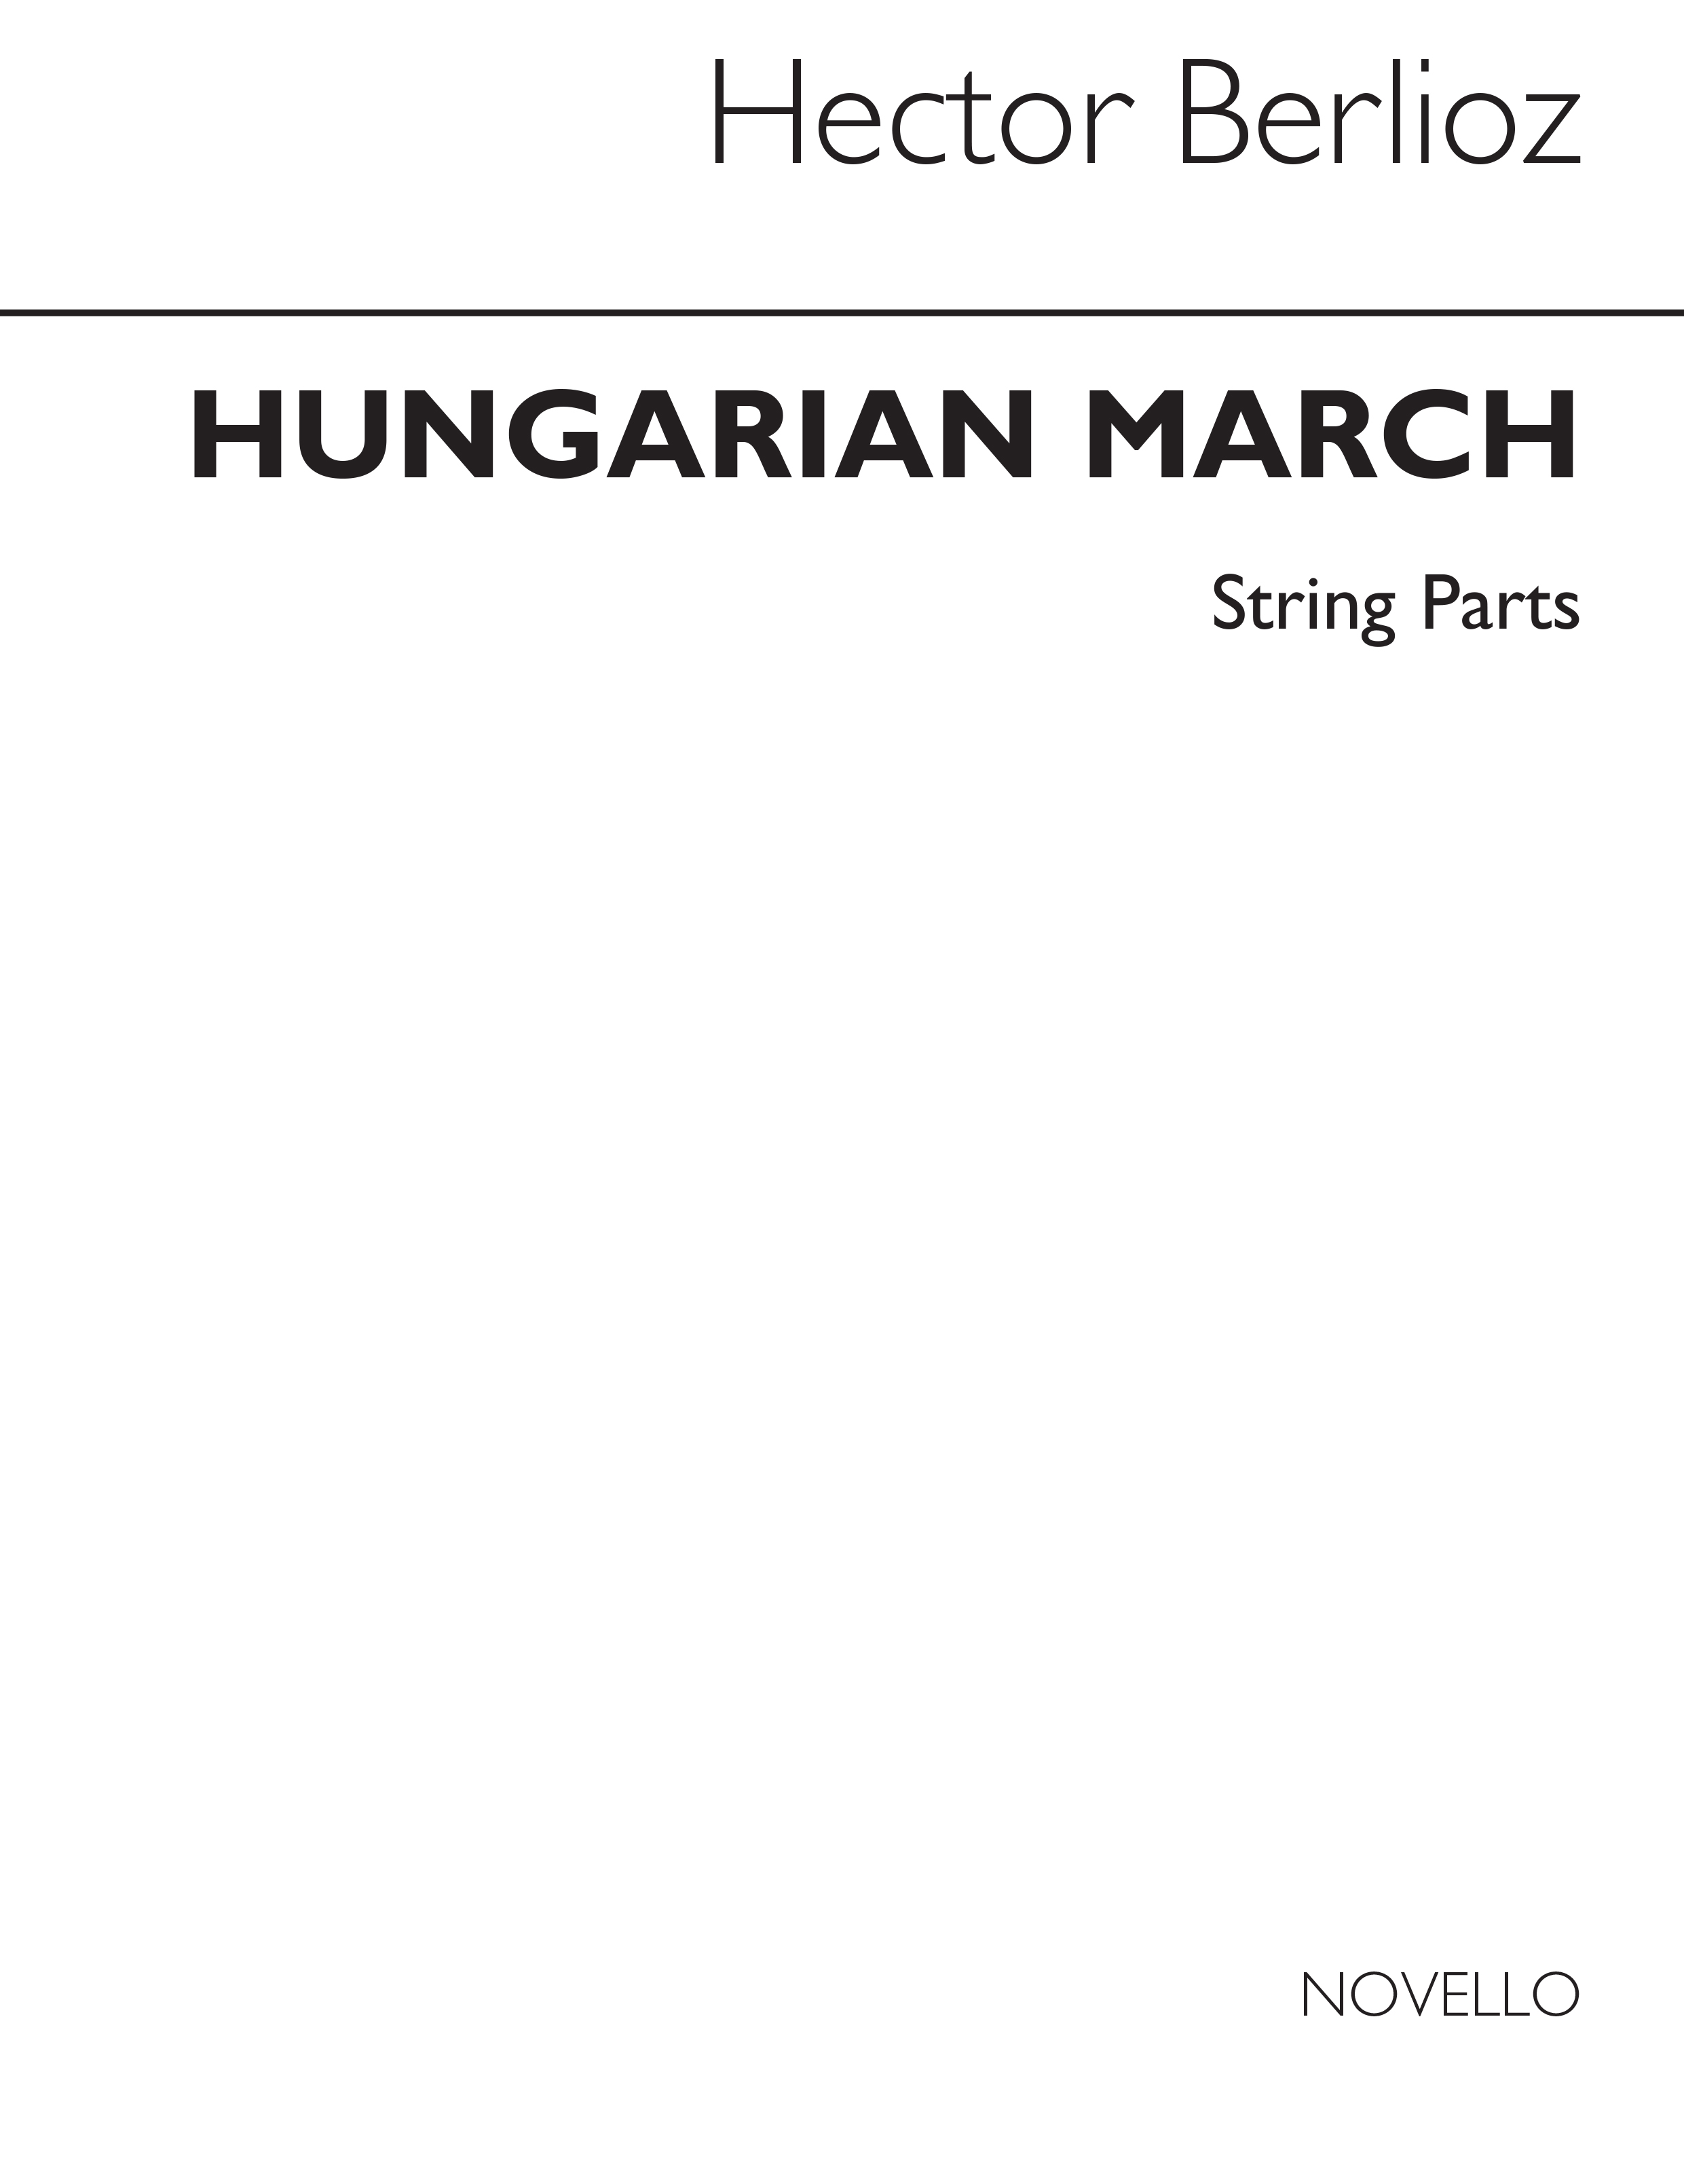 Hector Berlioz: Hungarian March Strings